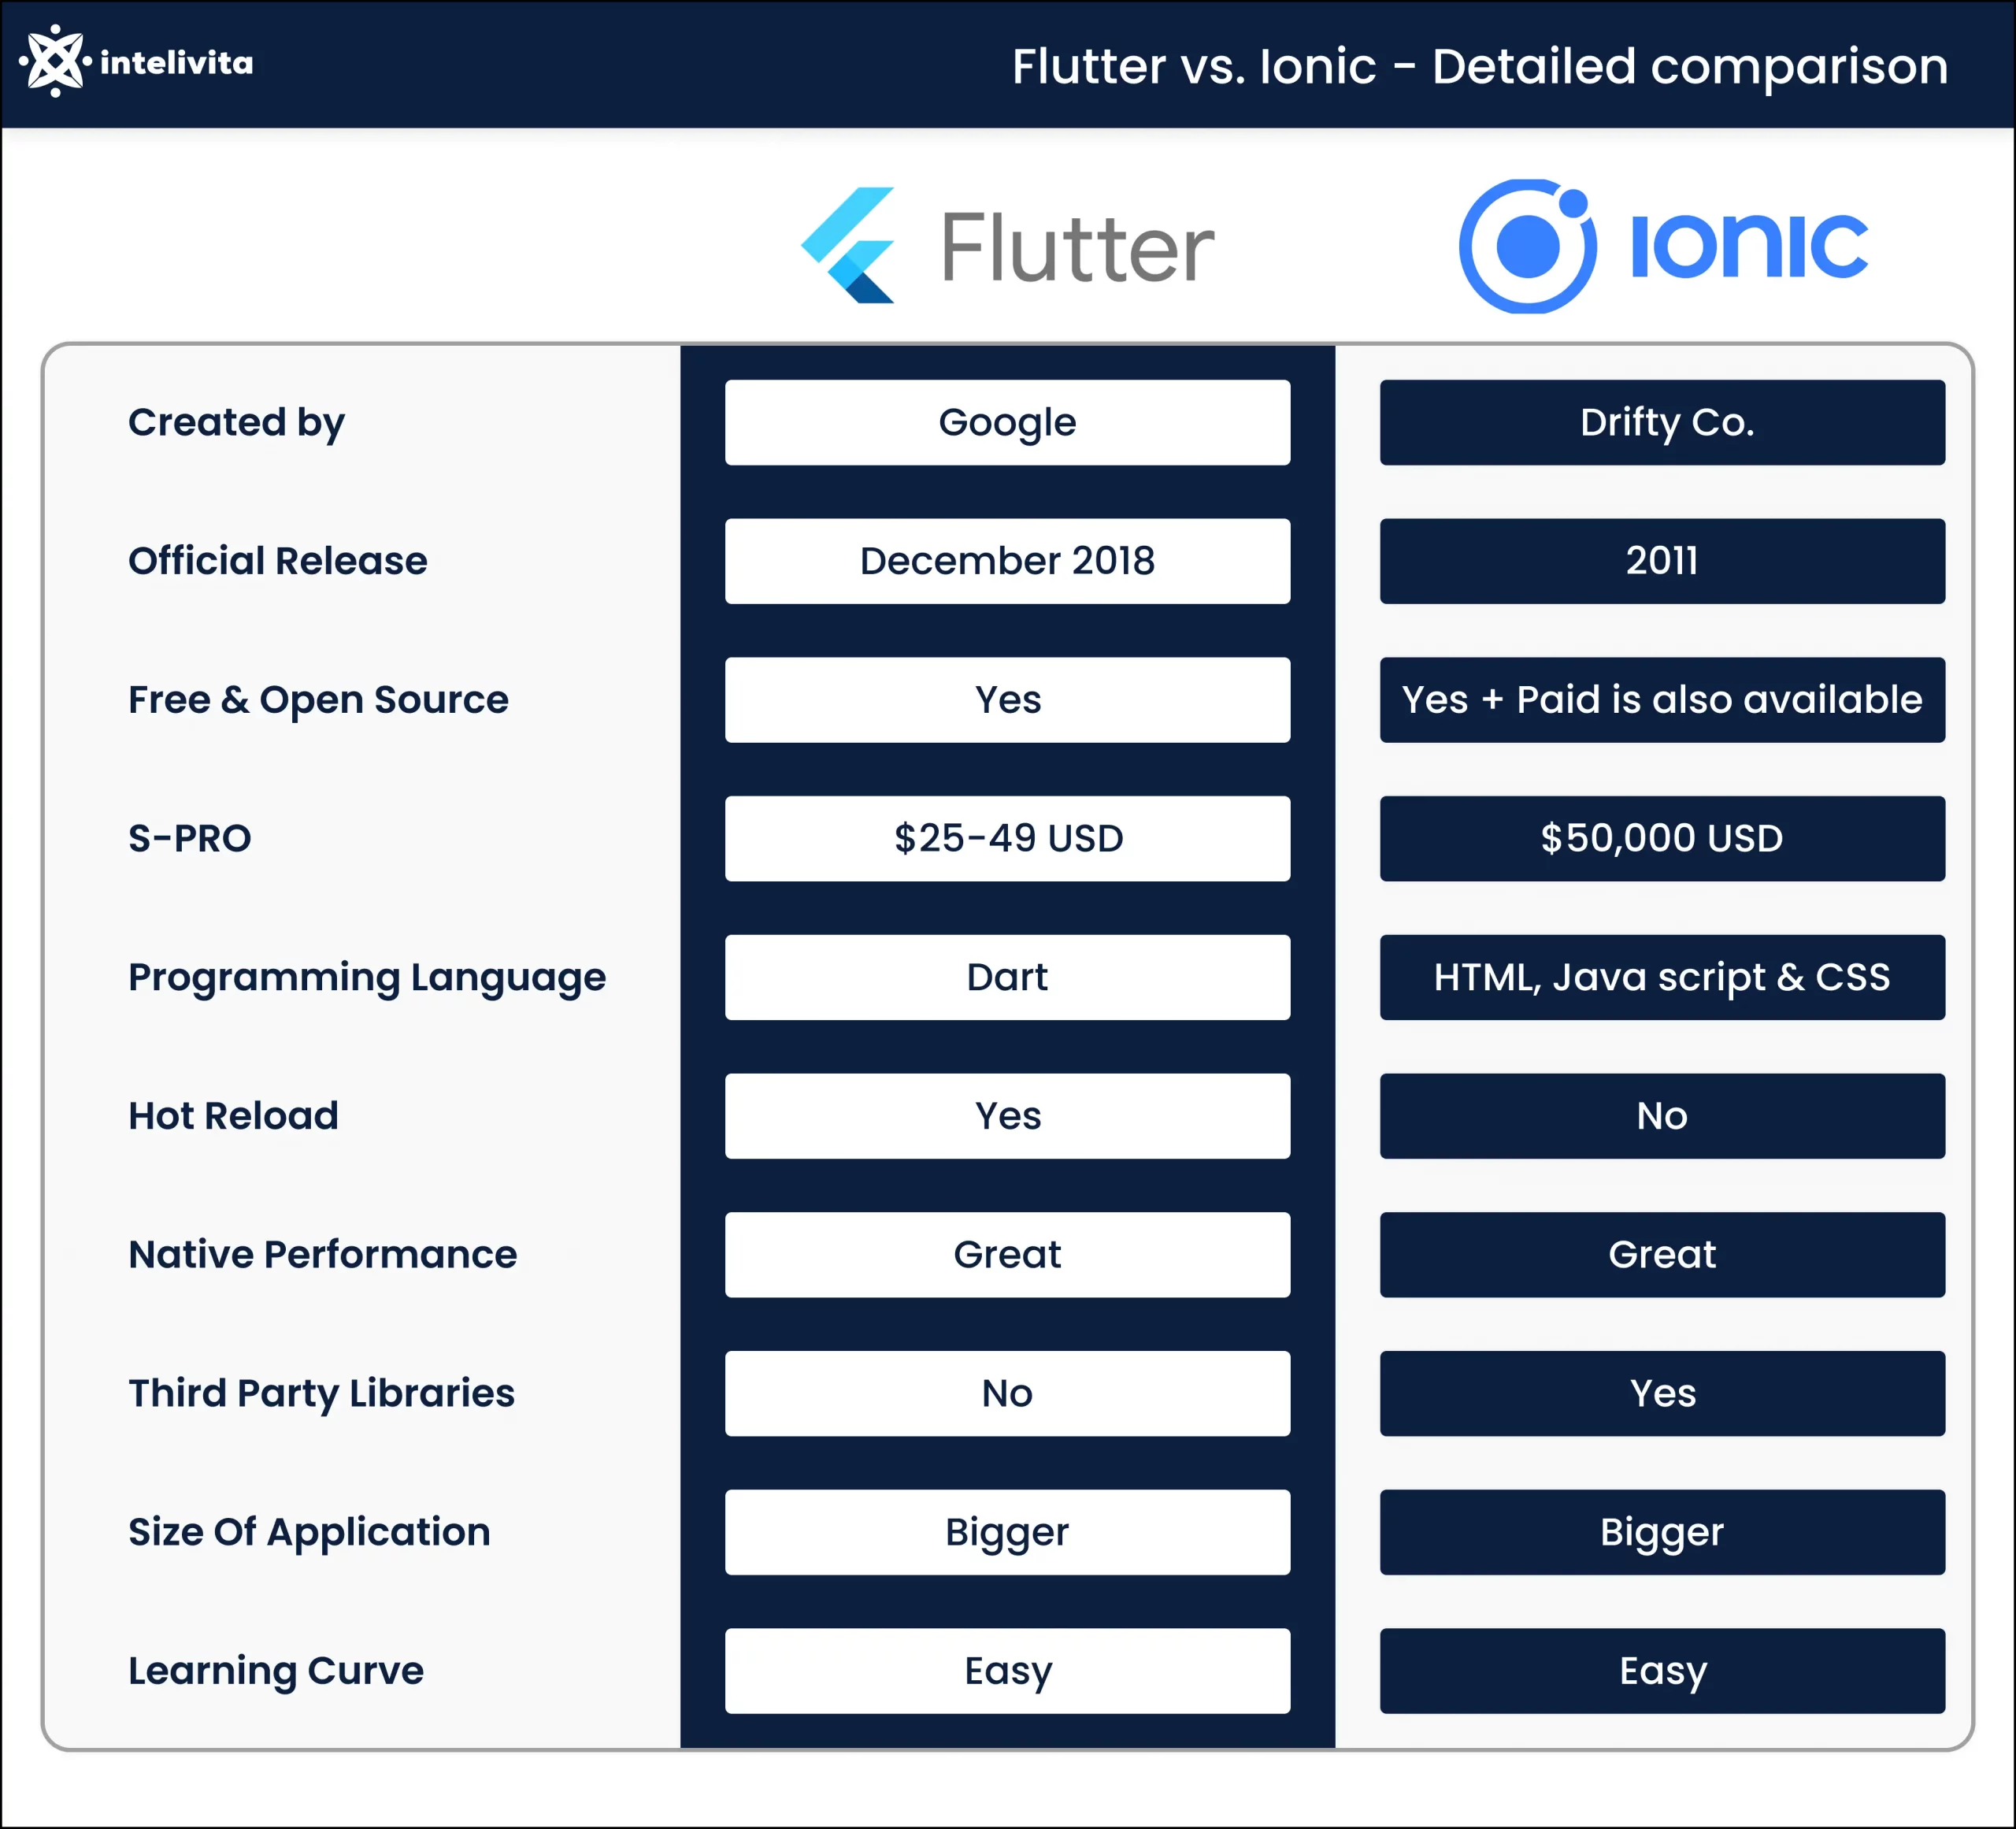 Image showing the detailed comparison of Flutter vs. Ionic topic